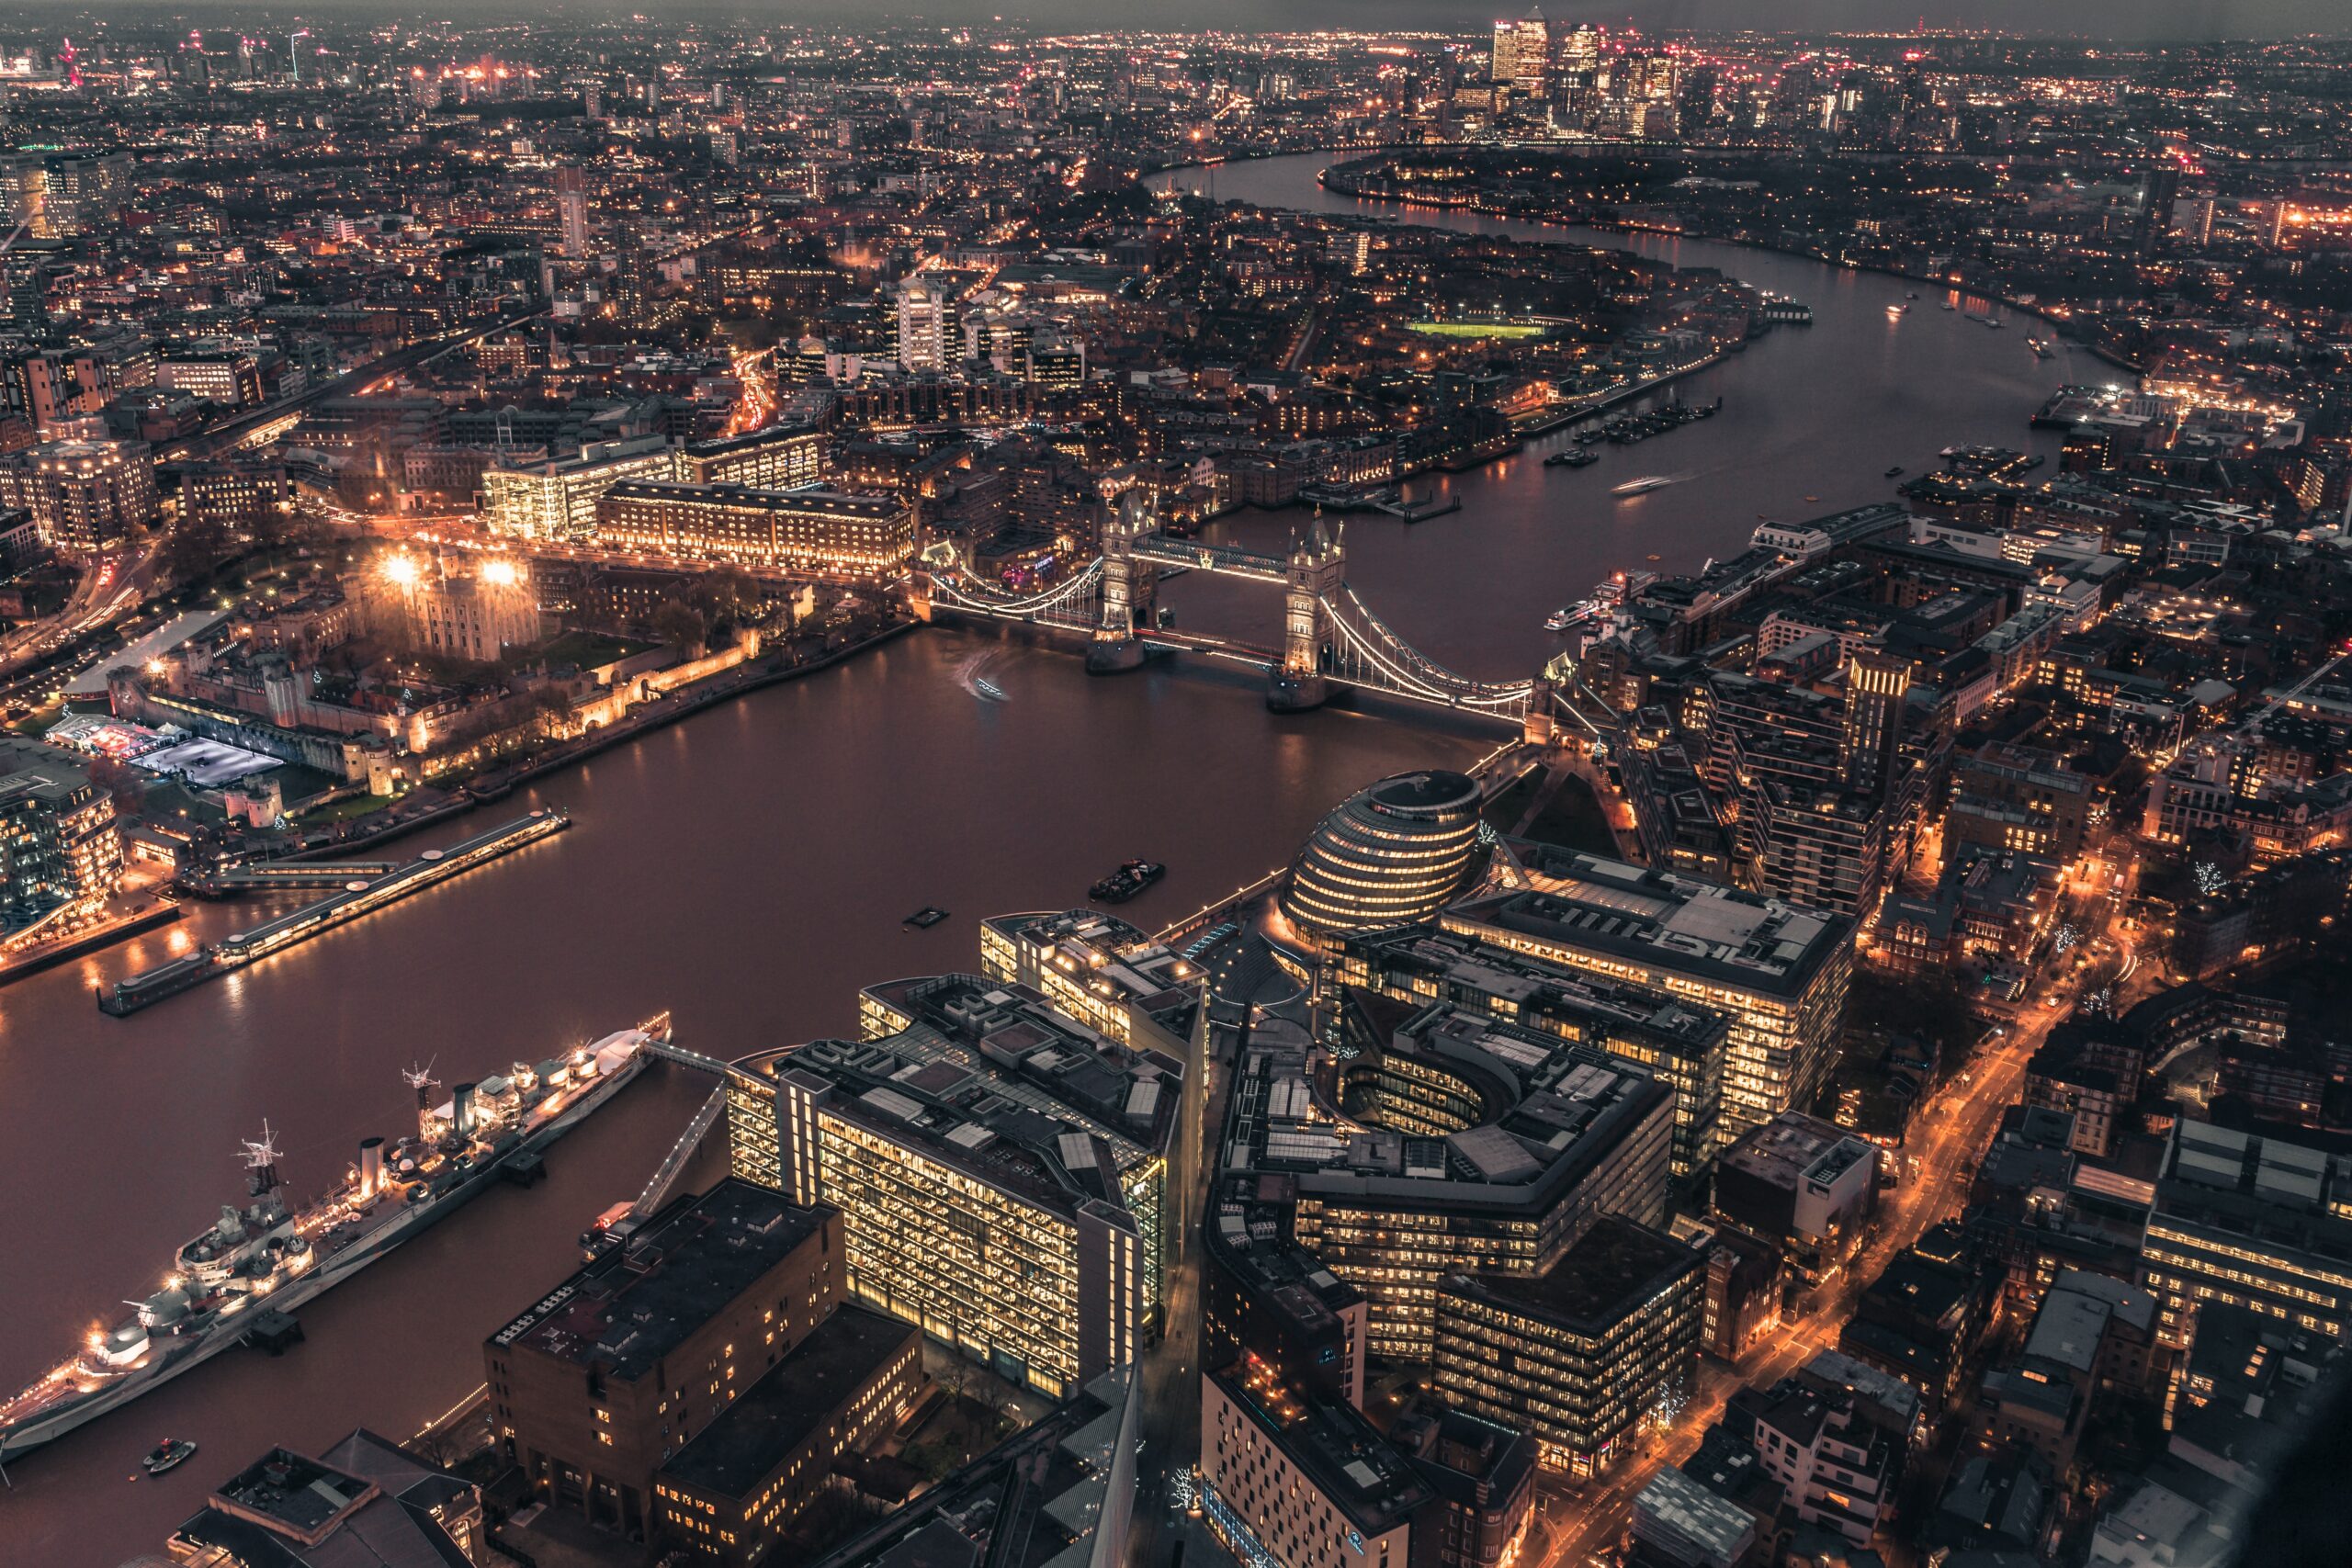 Ariel shot of Tower Bridge and the River Thames at night